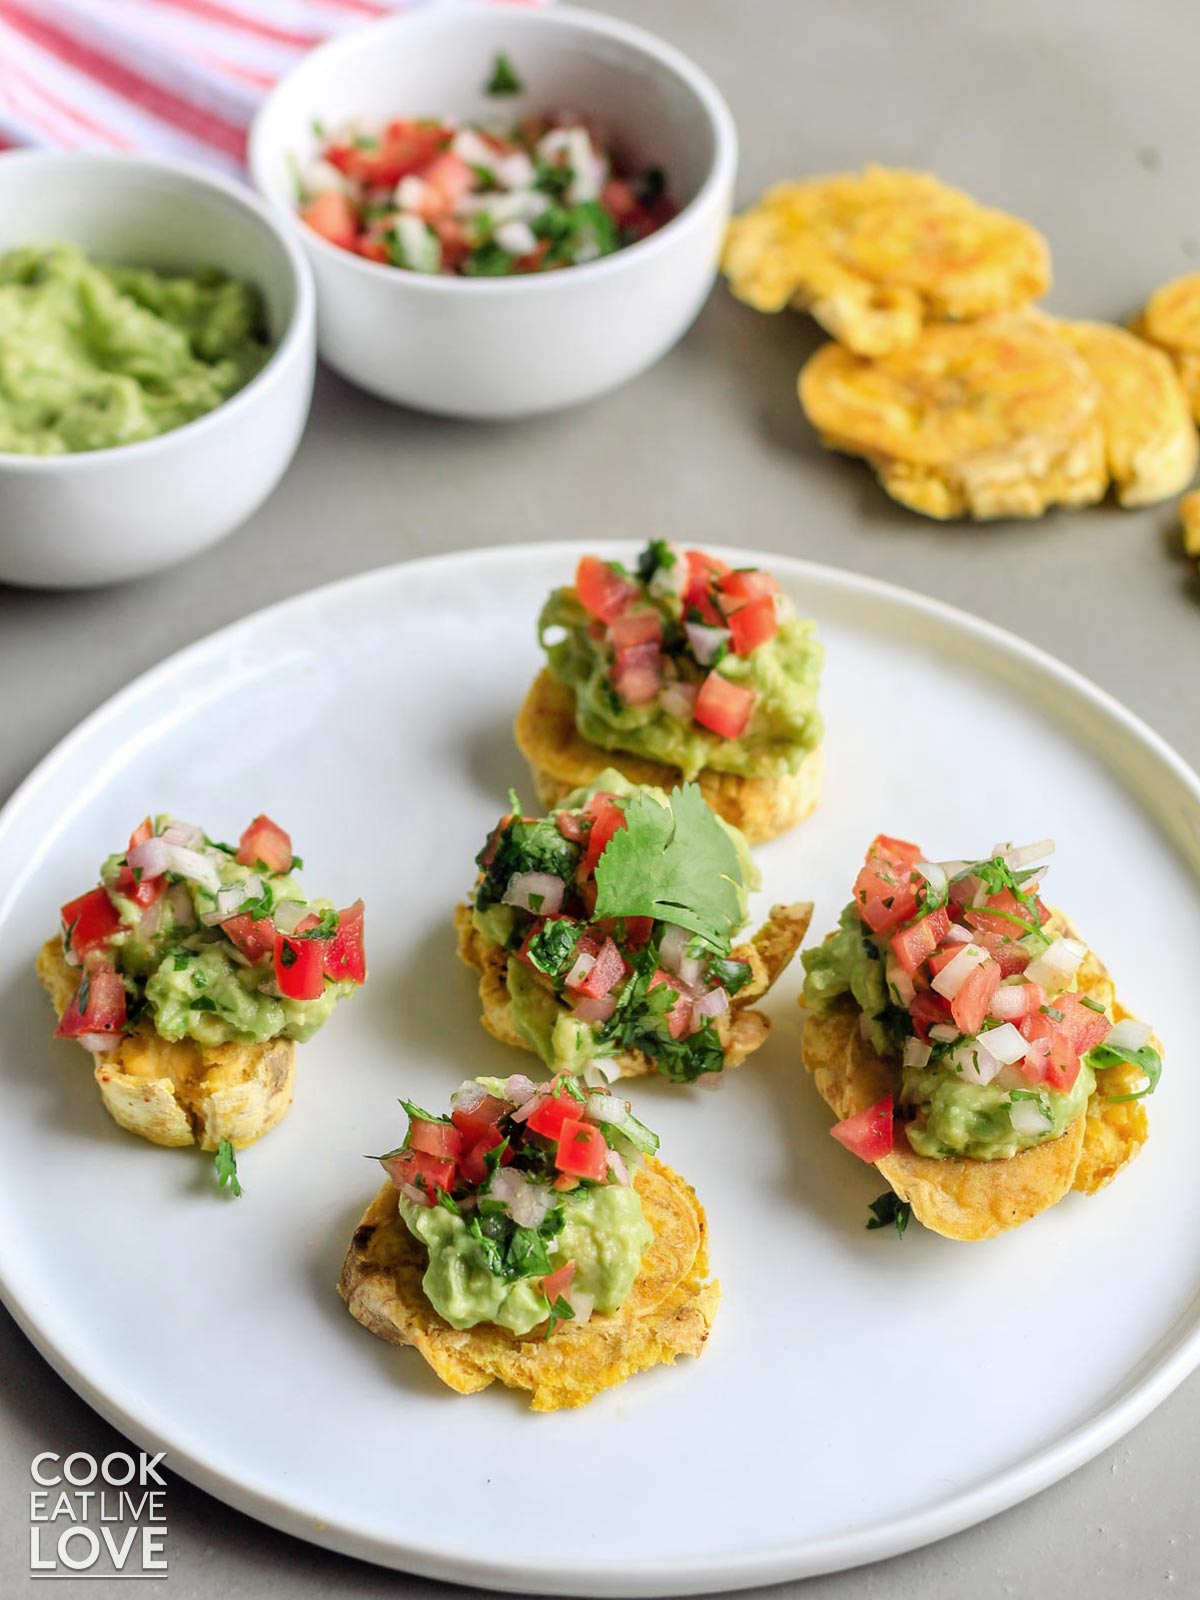 A plate of crispy tostones on the table with bowls of guacamole and tomatoes in the background.